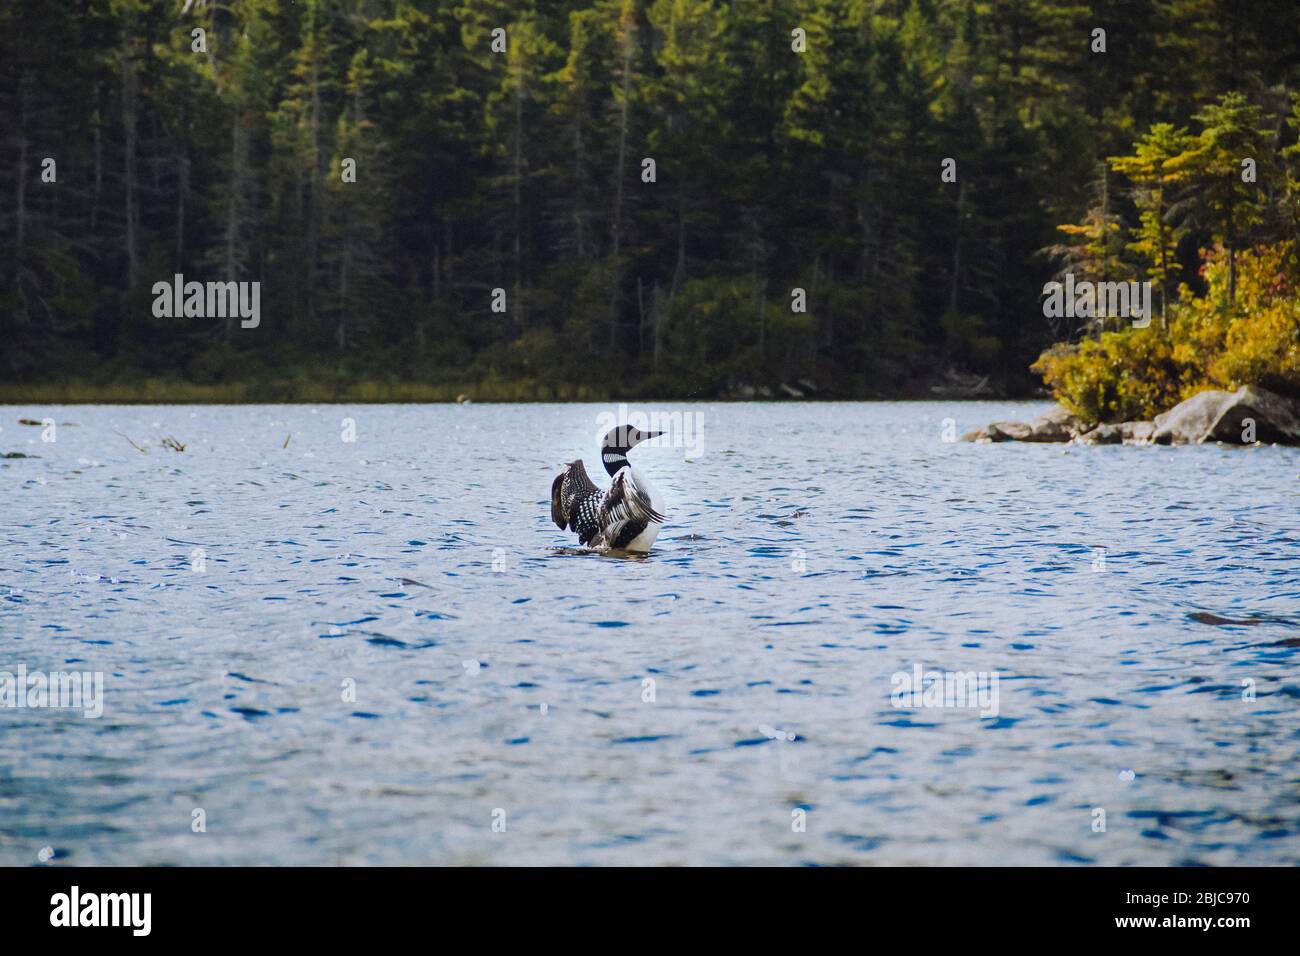 Loon rising out of the water on Long Pond, Benton, NH Stock Photo